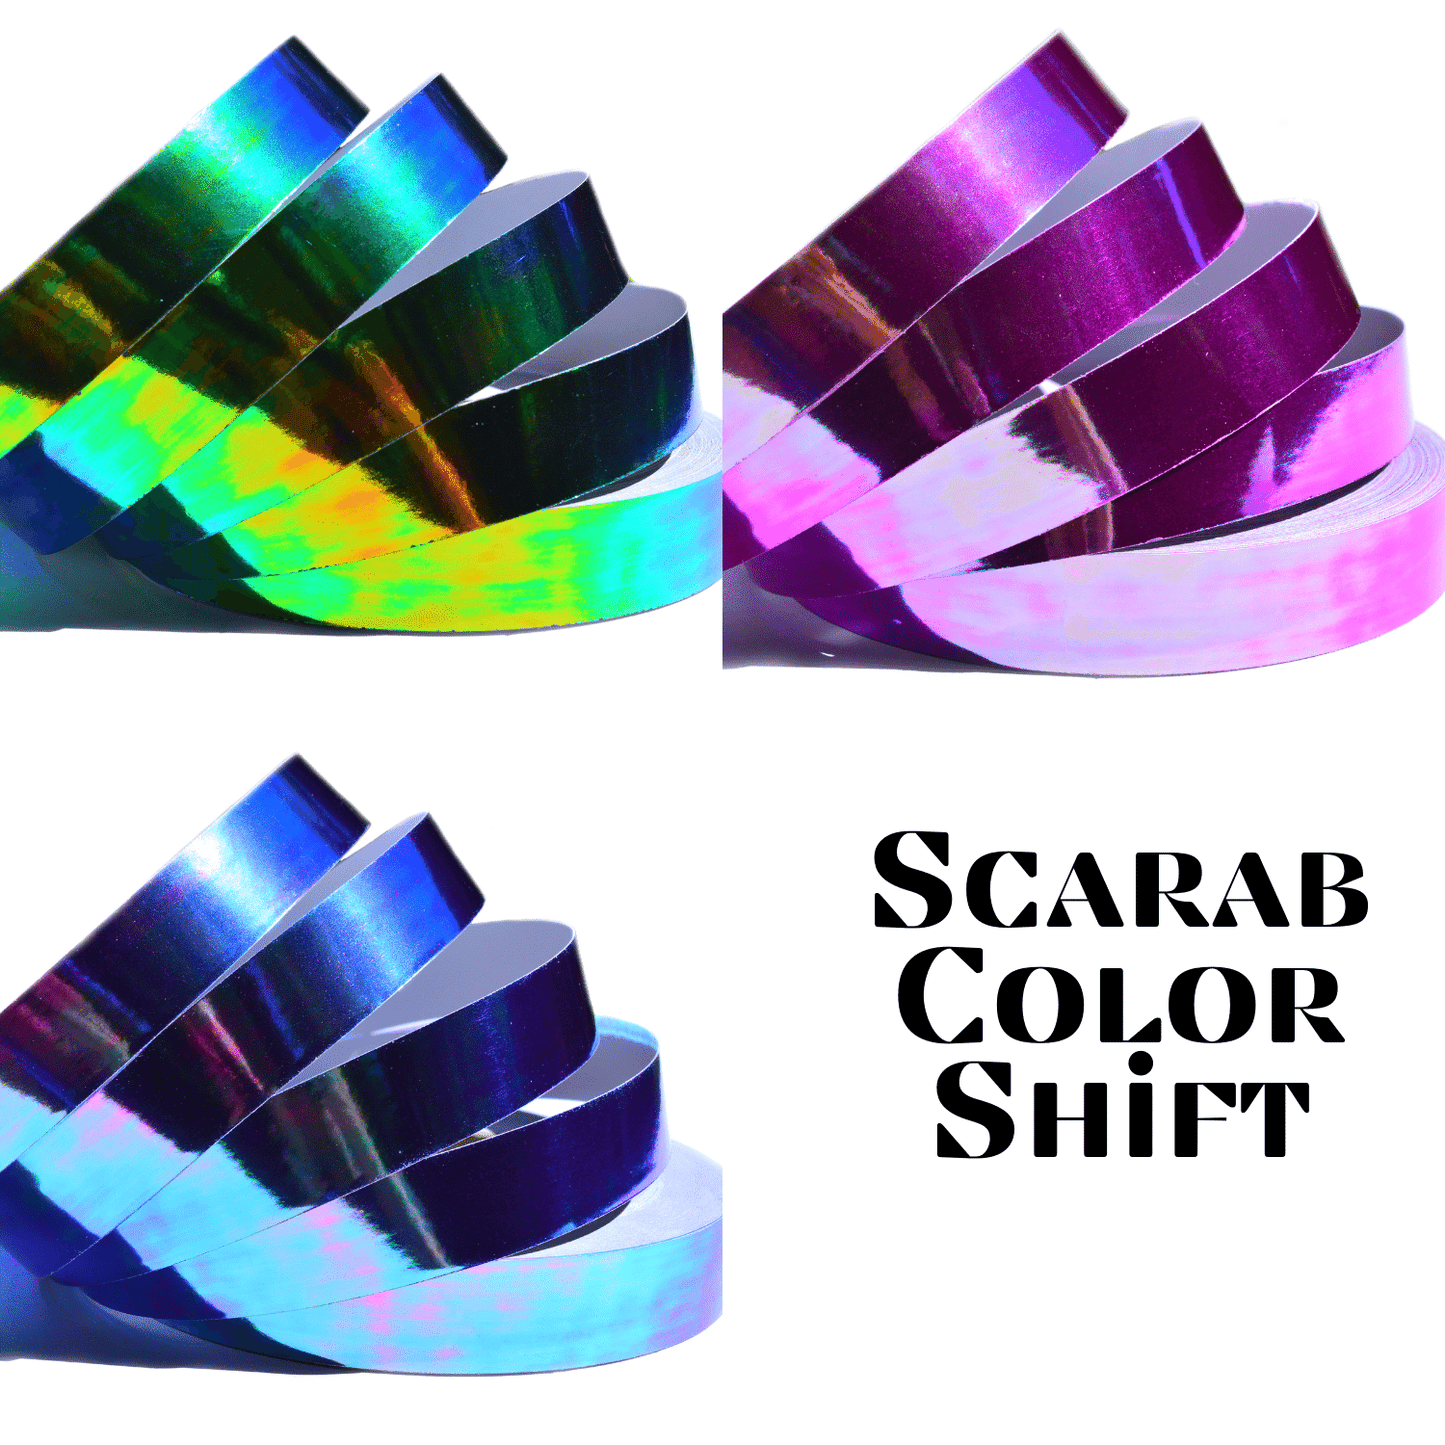 Scarab Color-Shift Performance Taped Hoops